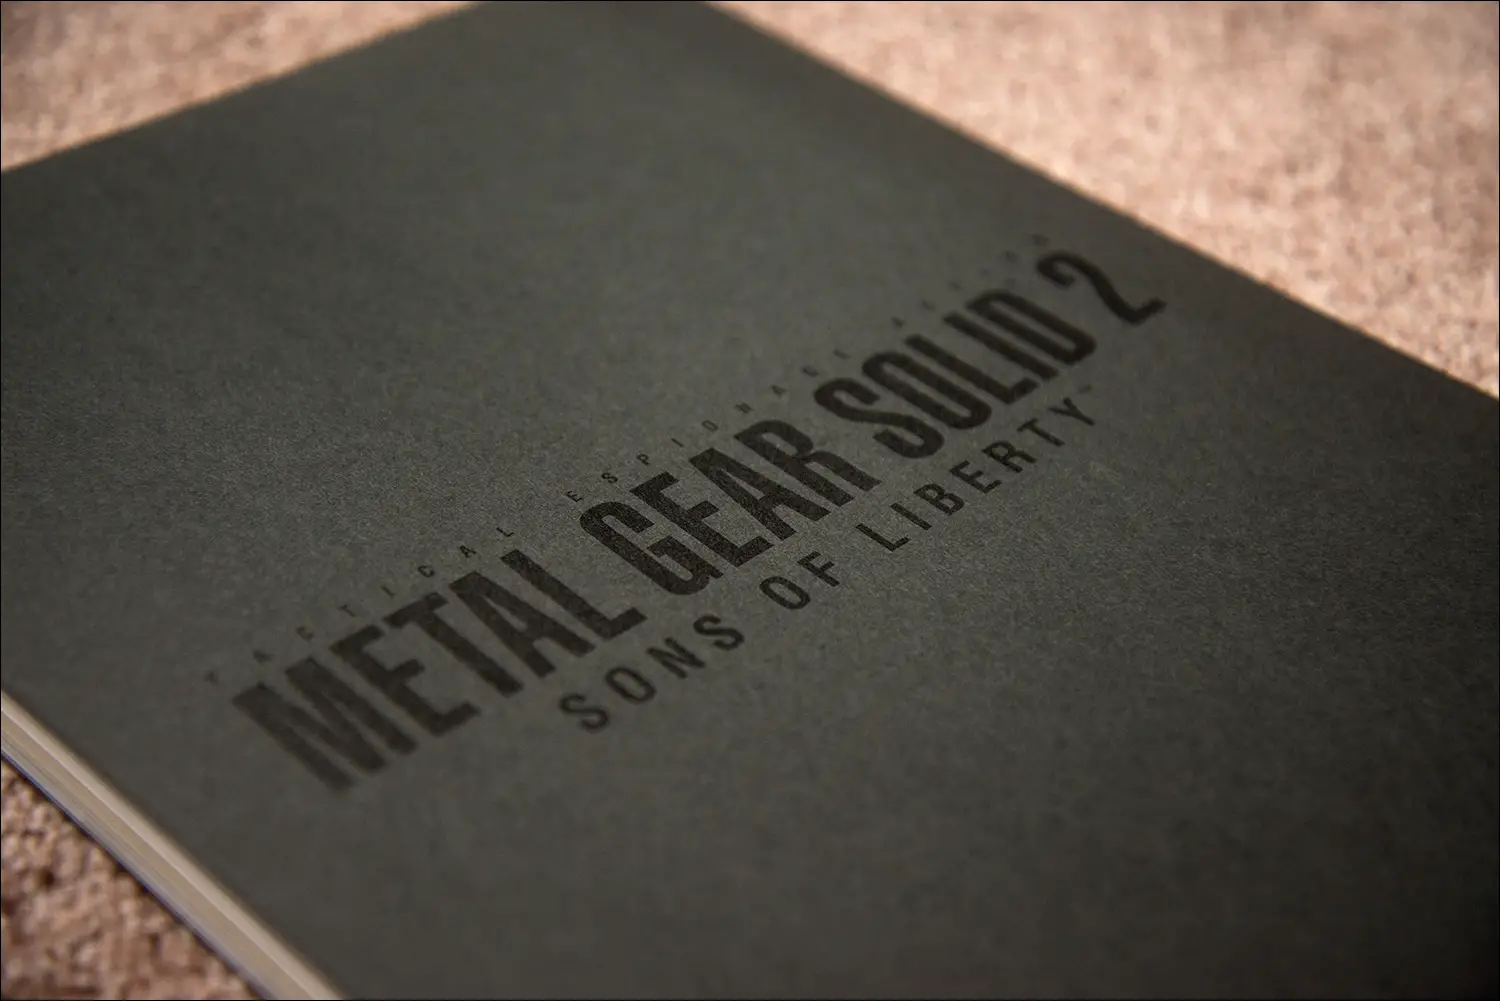 The-Art-of-Metal-Gear-Solid-2-Title